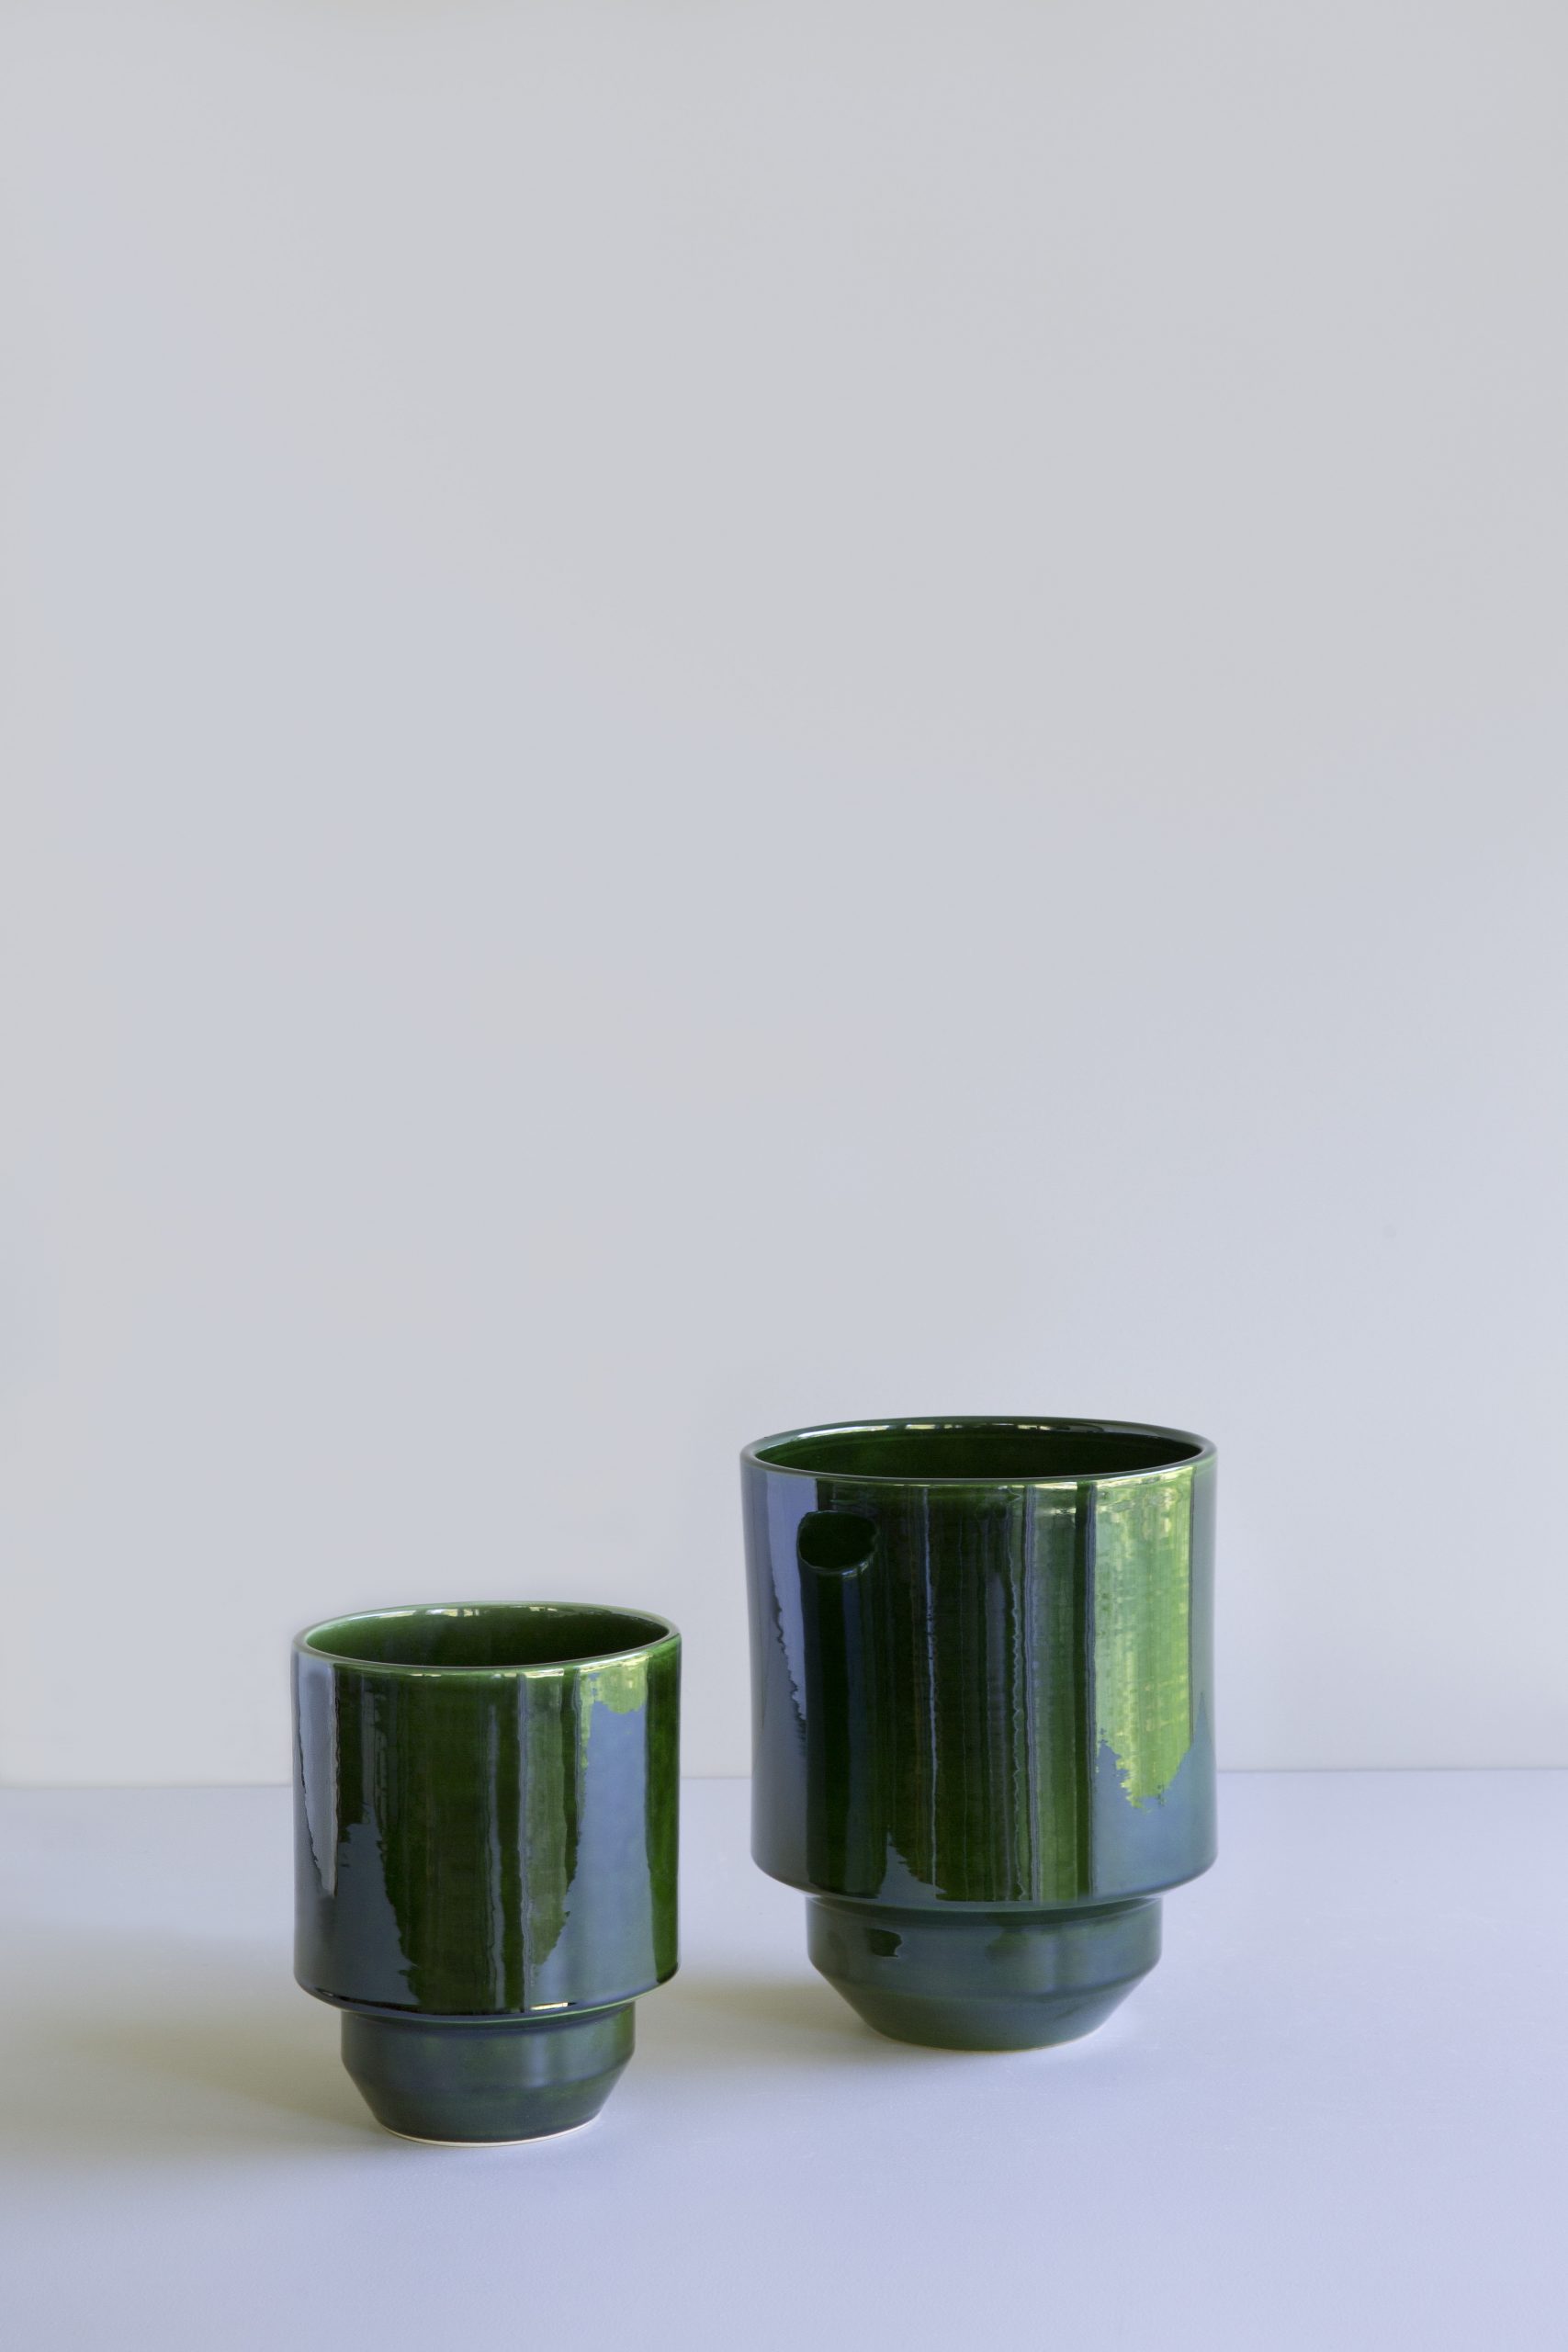 Empty green cover pots in two different sizes.